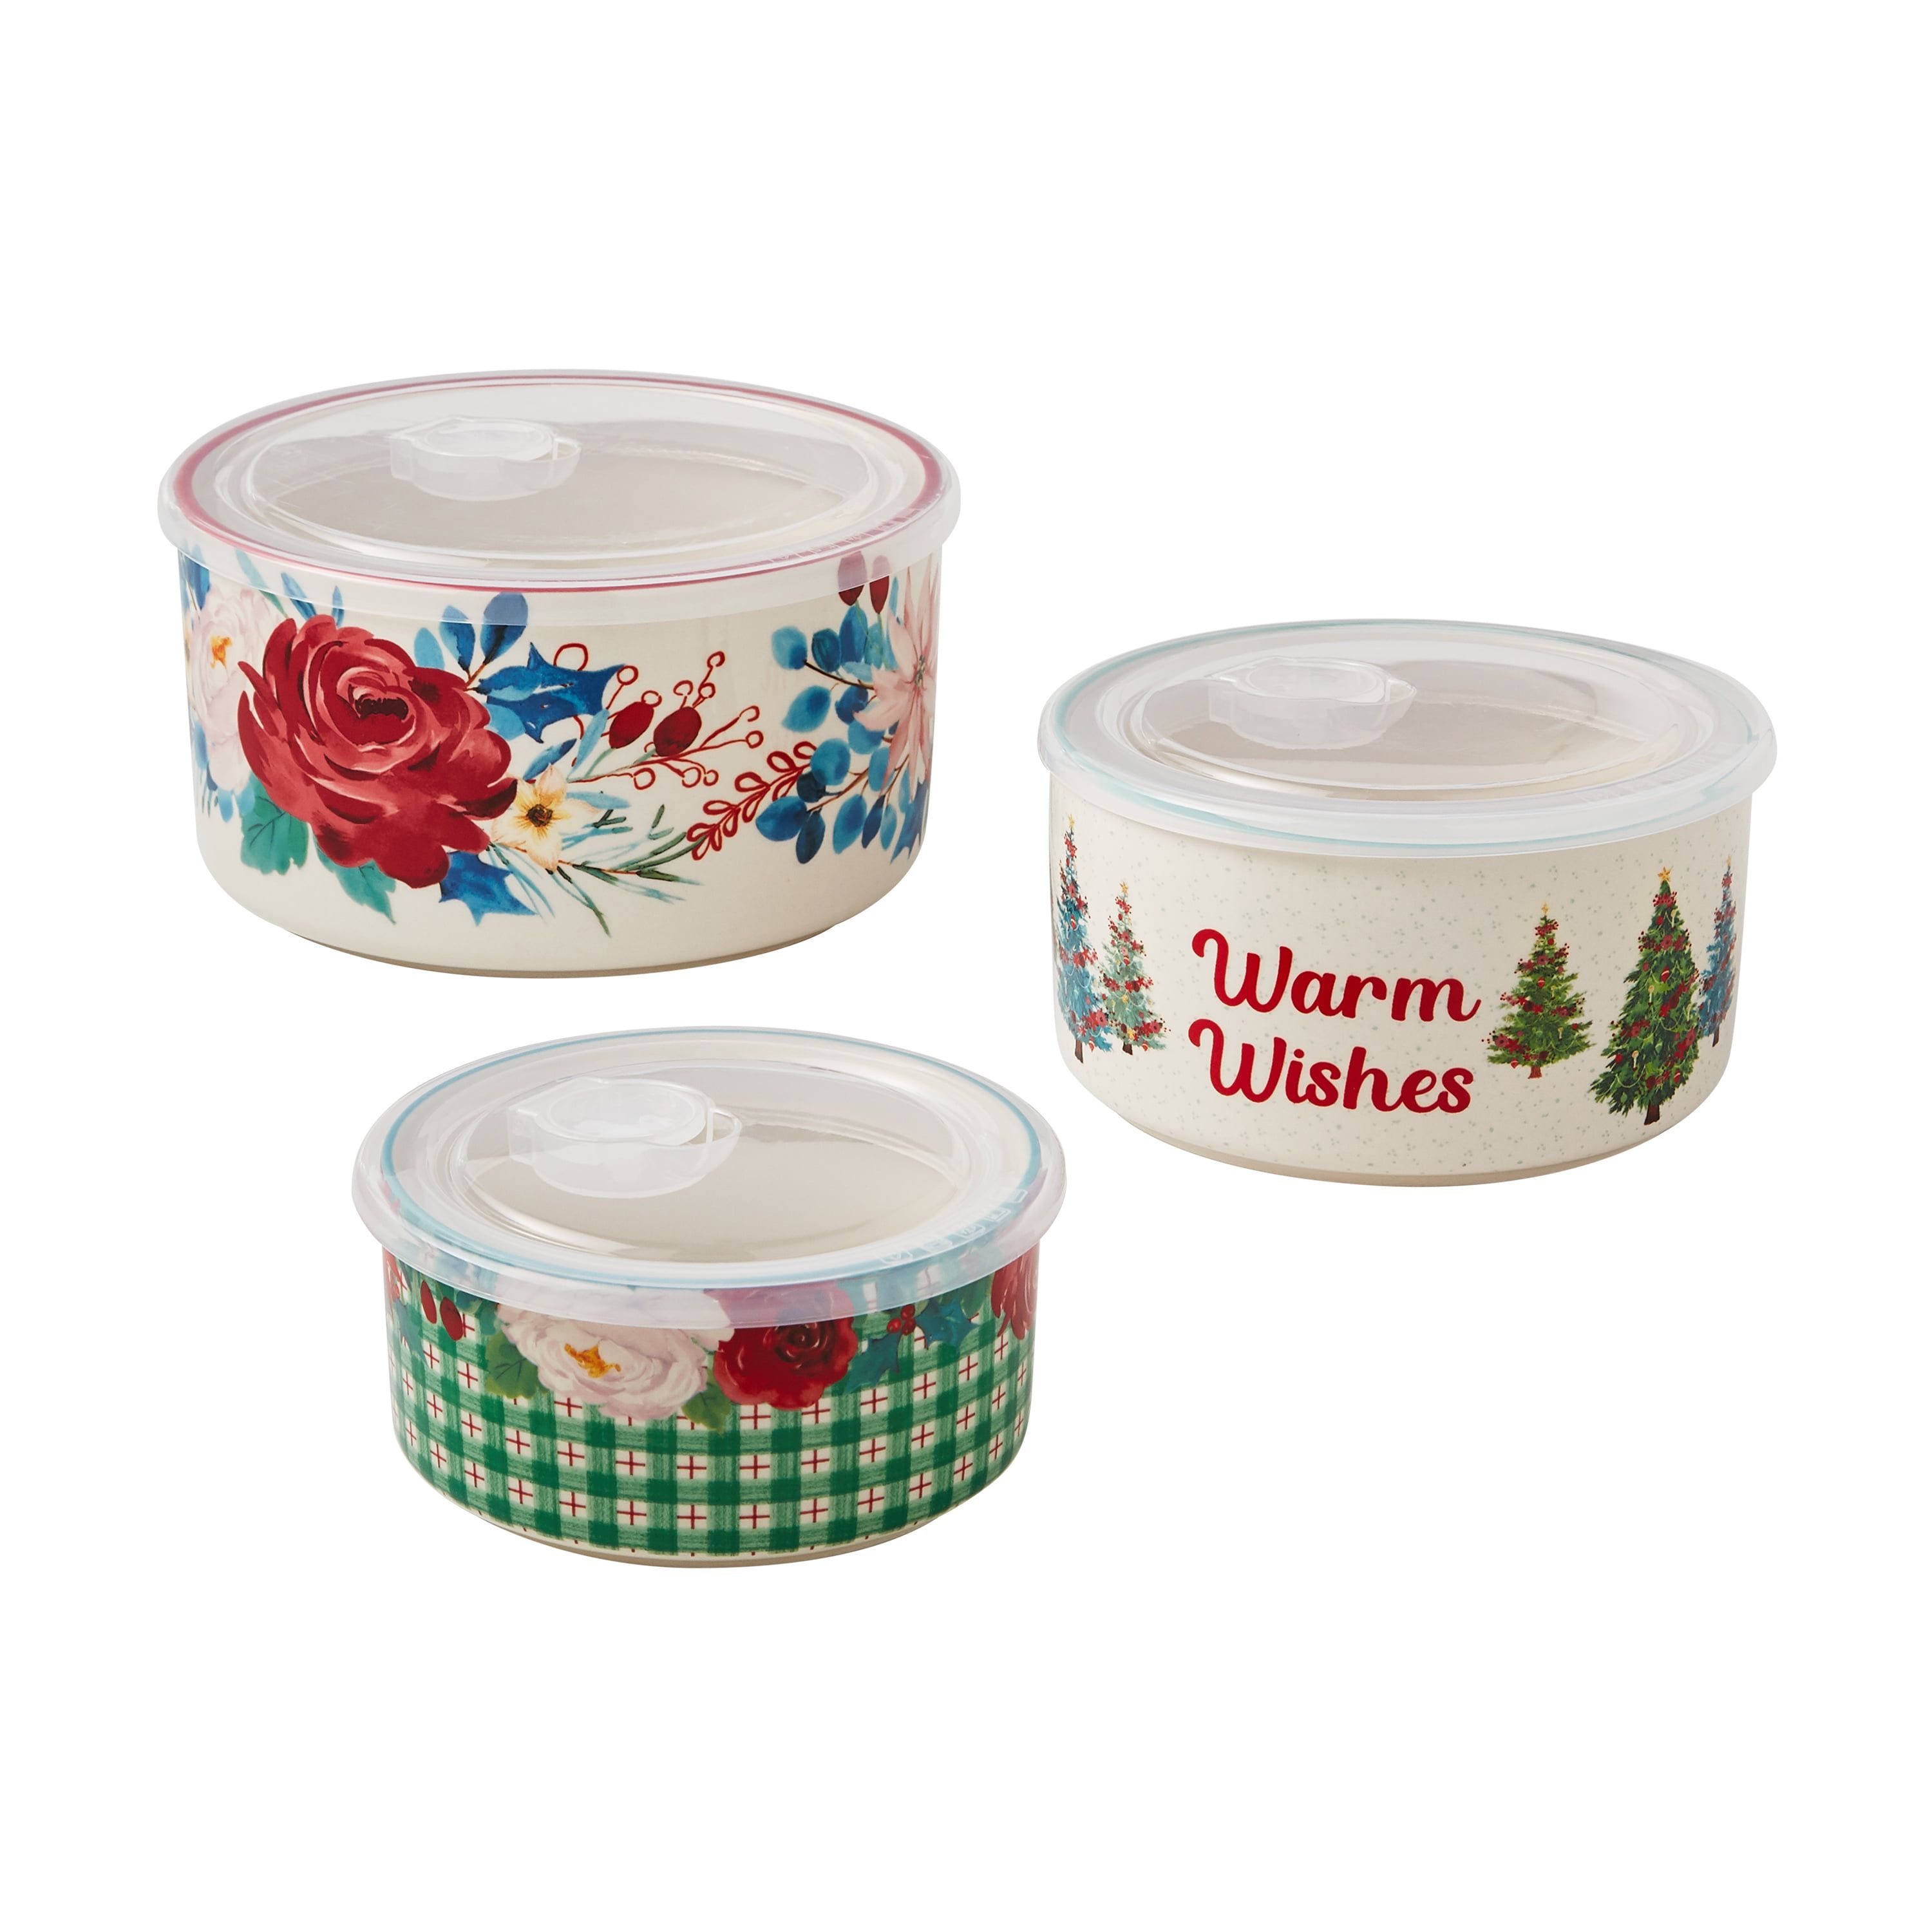 The Pioneer Woman Ceramic Holiday Containers